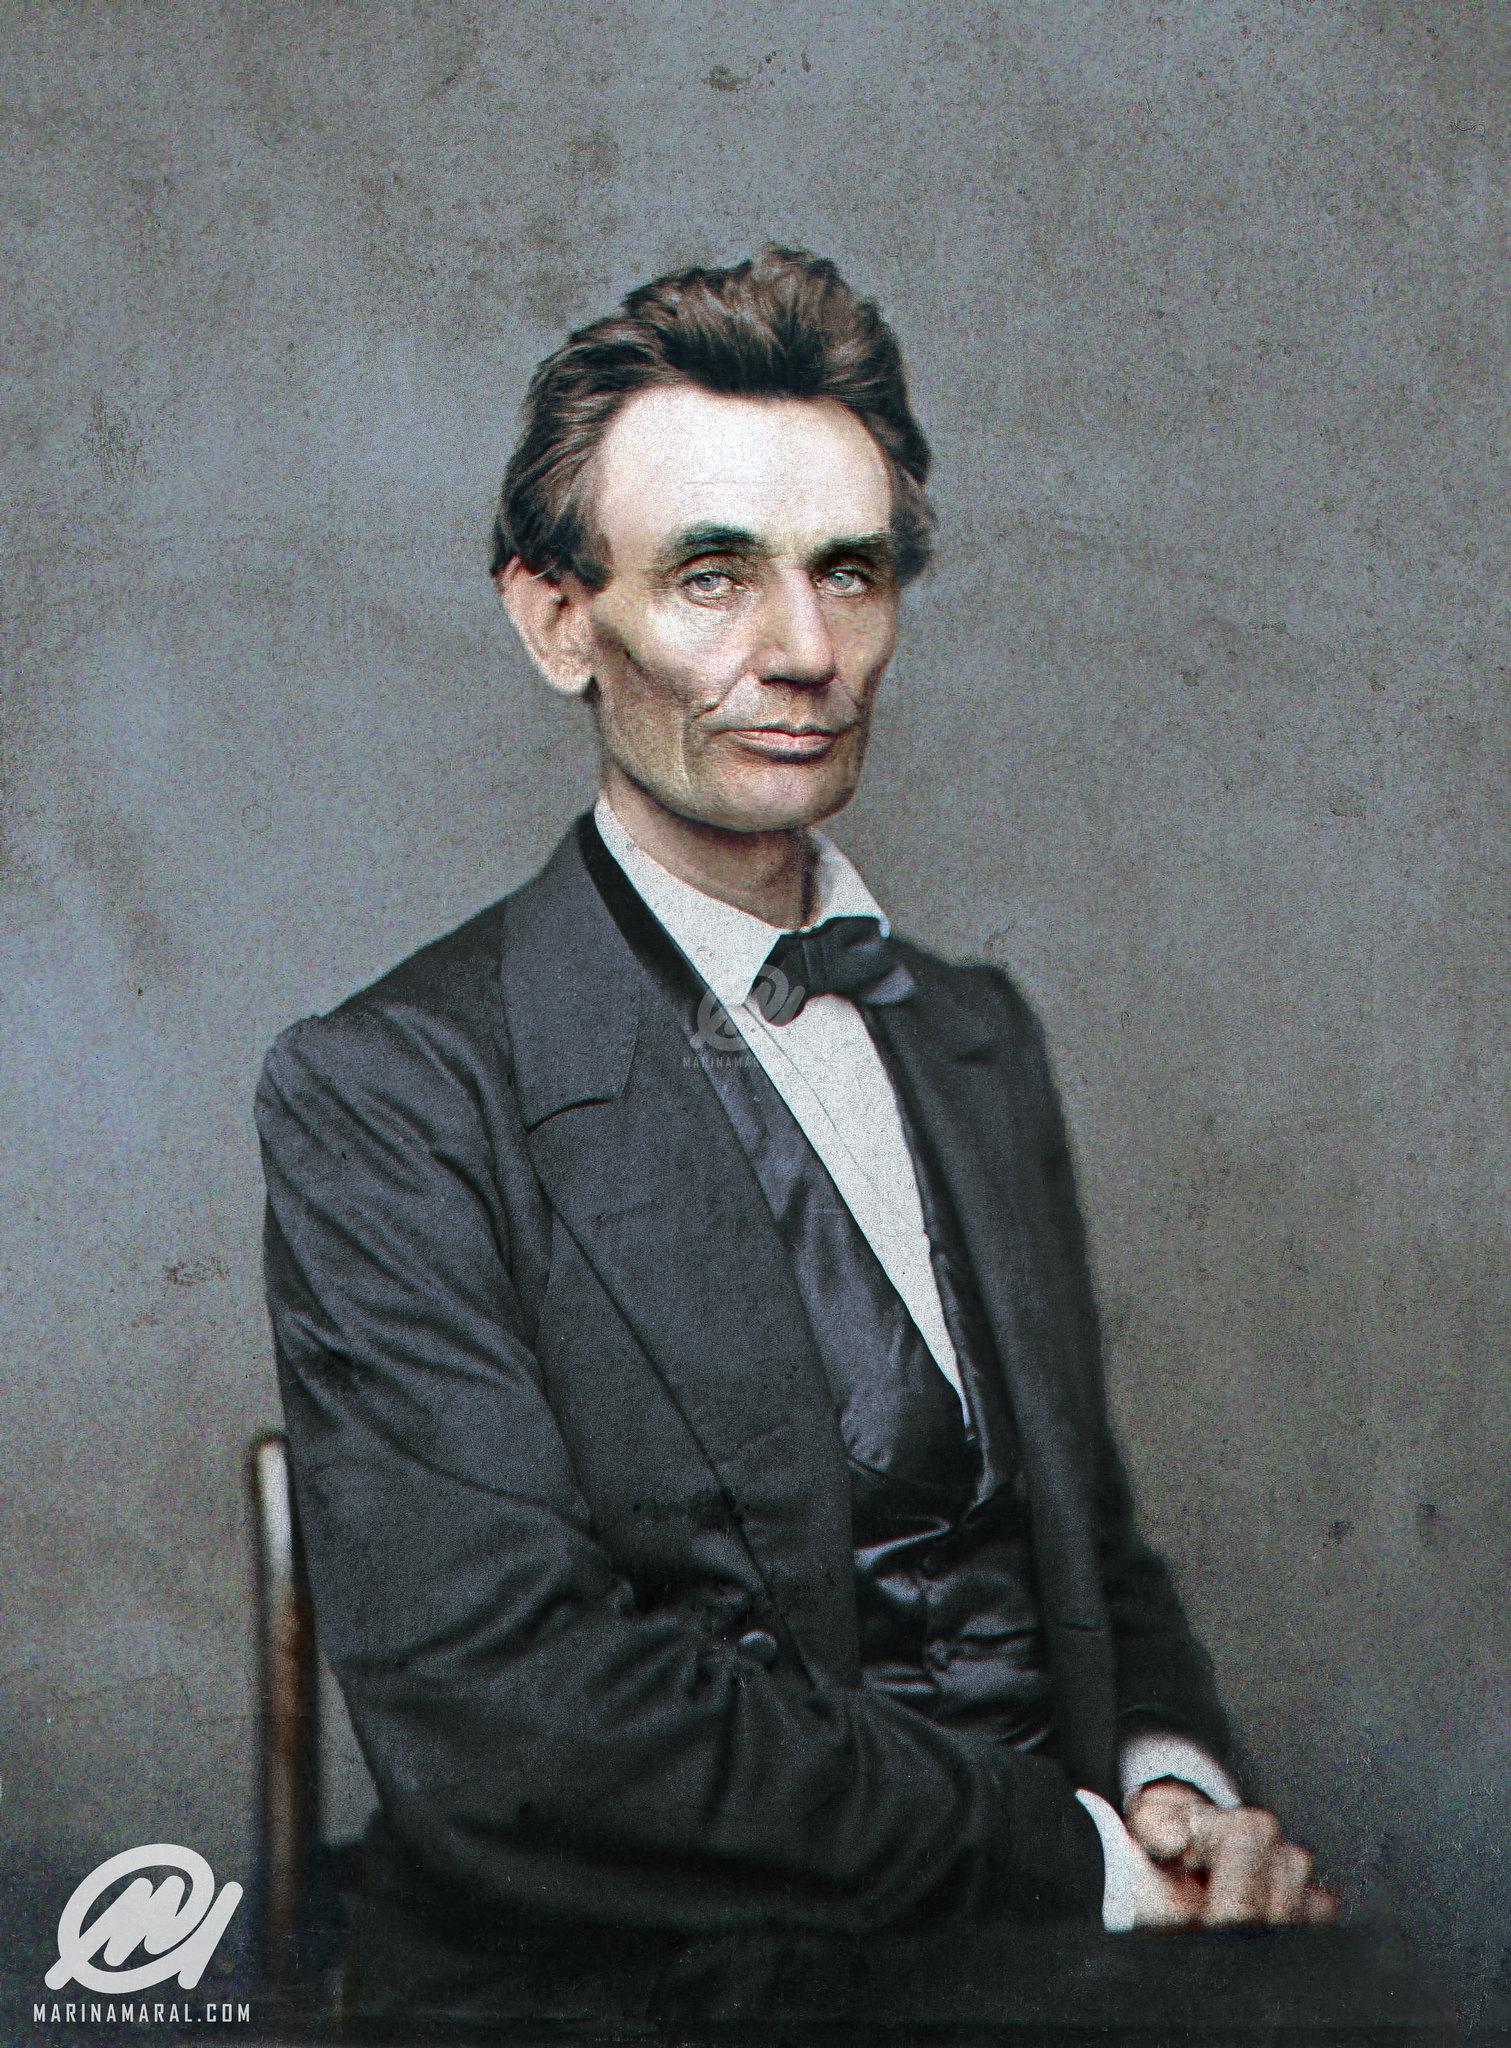 Colorized by me: Abraham Lincoln, circa 1860.